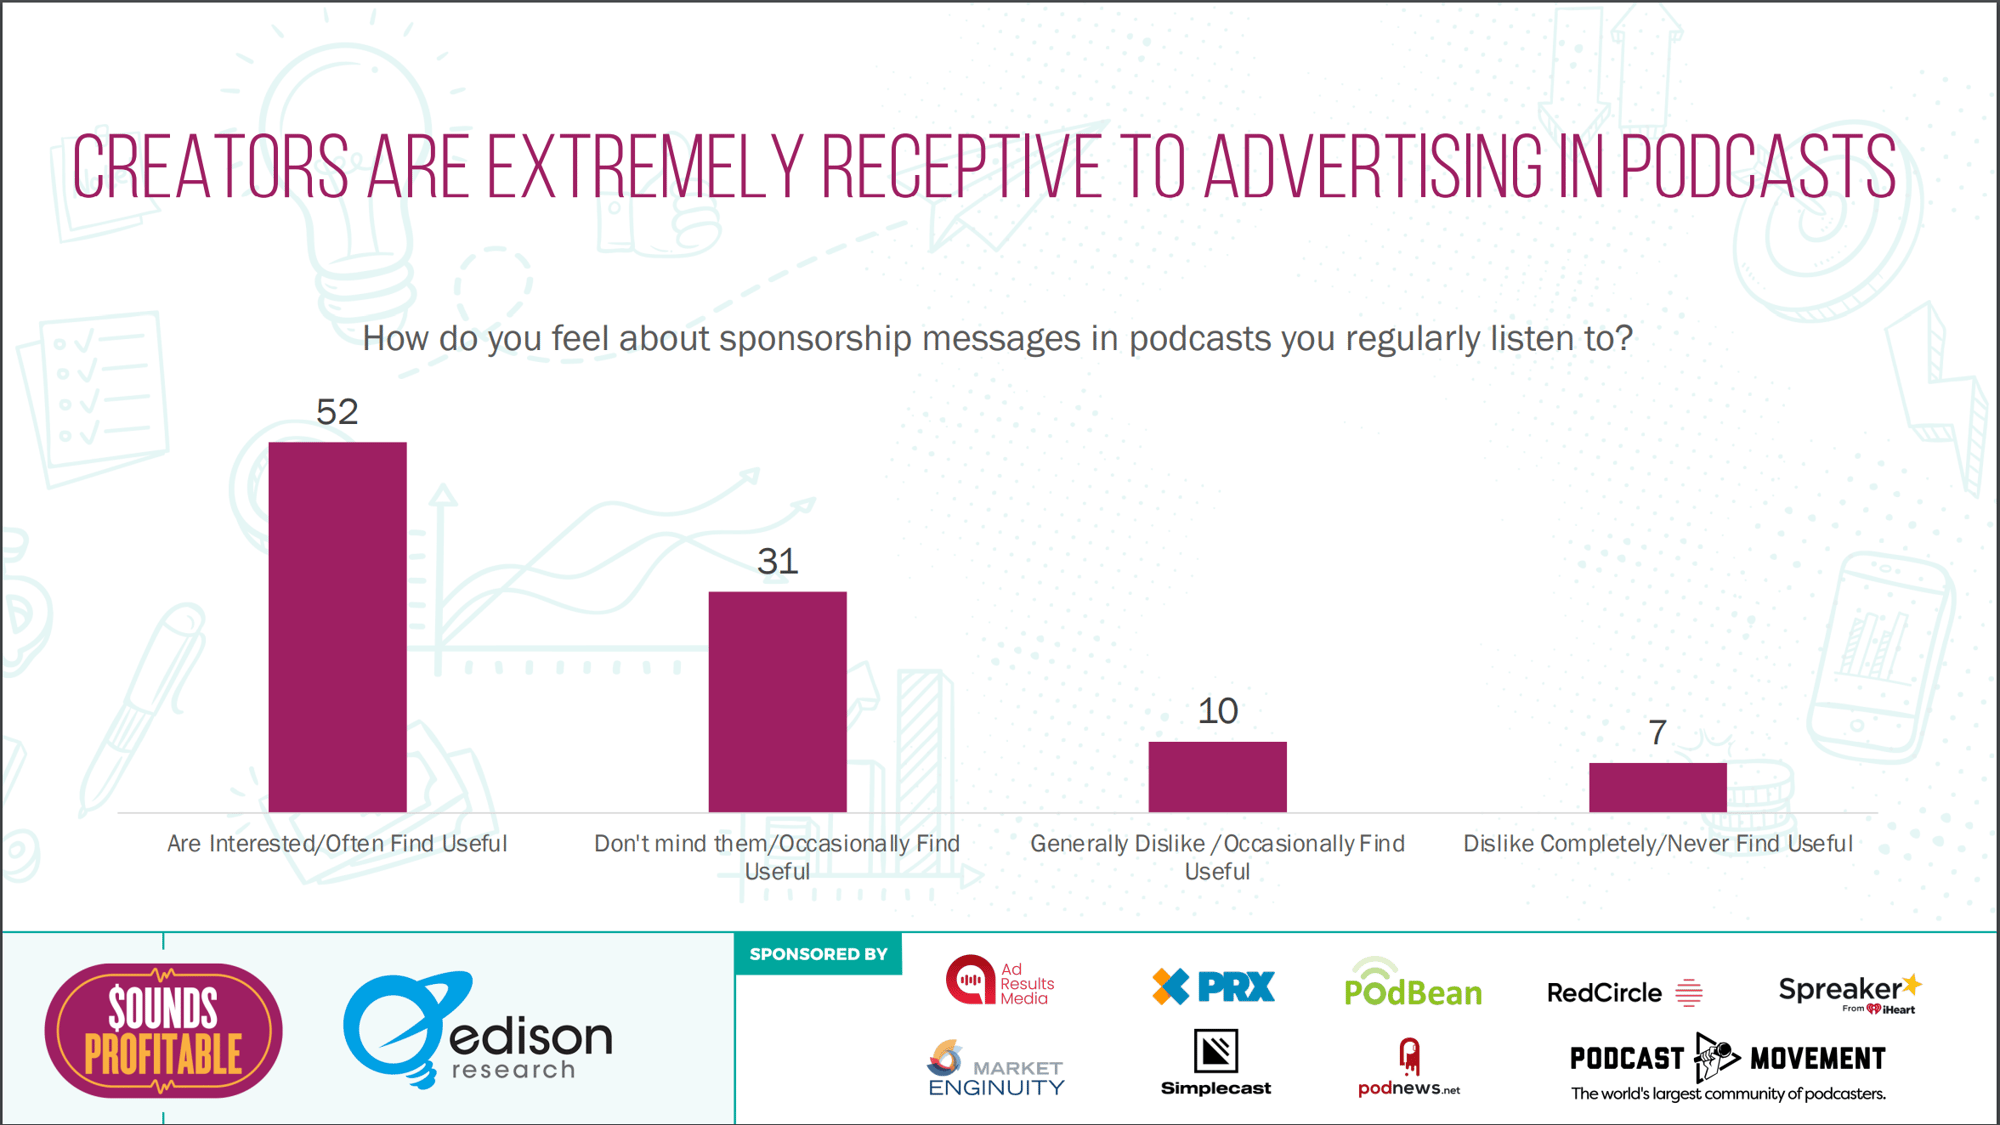 Bar graph titled Creators are Extremely Receptive to Advertising in Podcasts. 52% are interested in ads/often find them useful. 31% don't mind them/occasionally find them useful. 10% generally dislike ads/occasionally find them useful. 7% dislike ads completely/never find them useful.